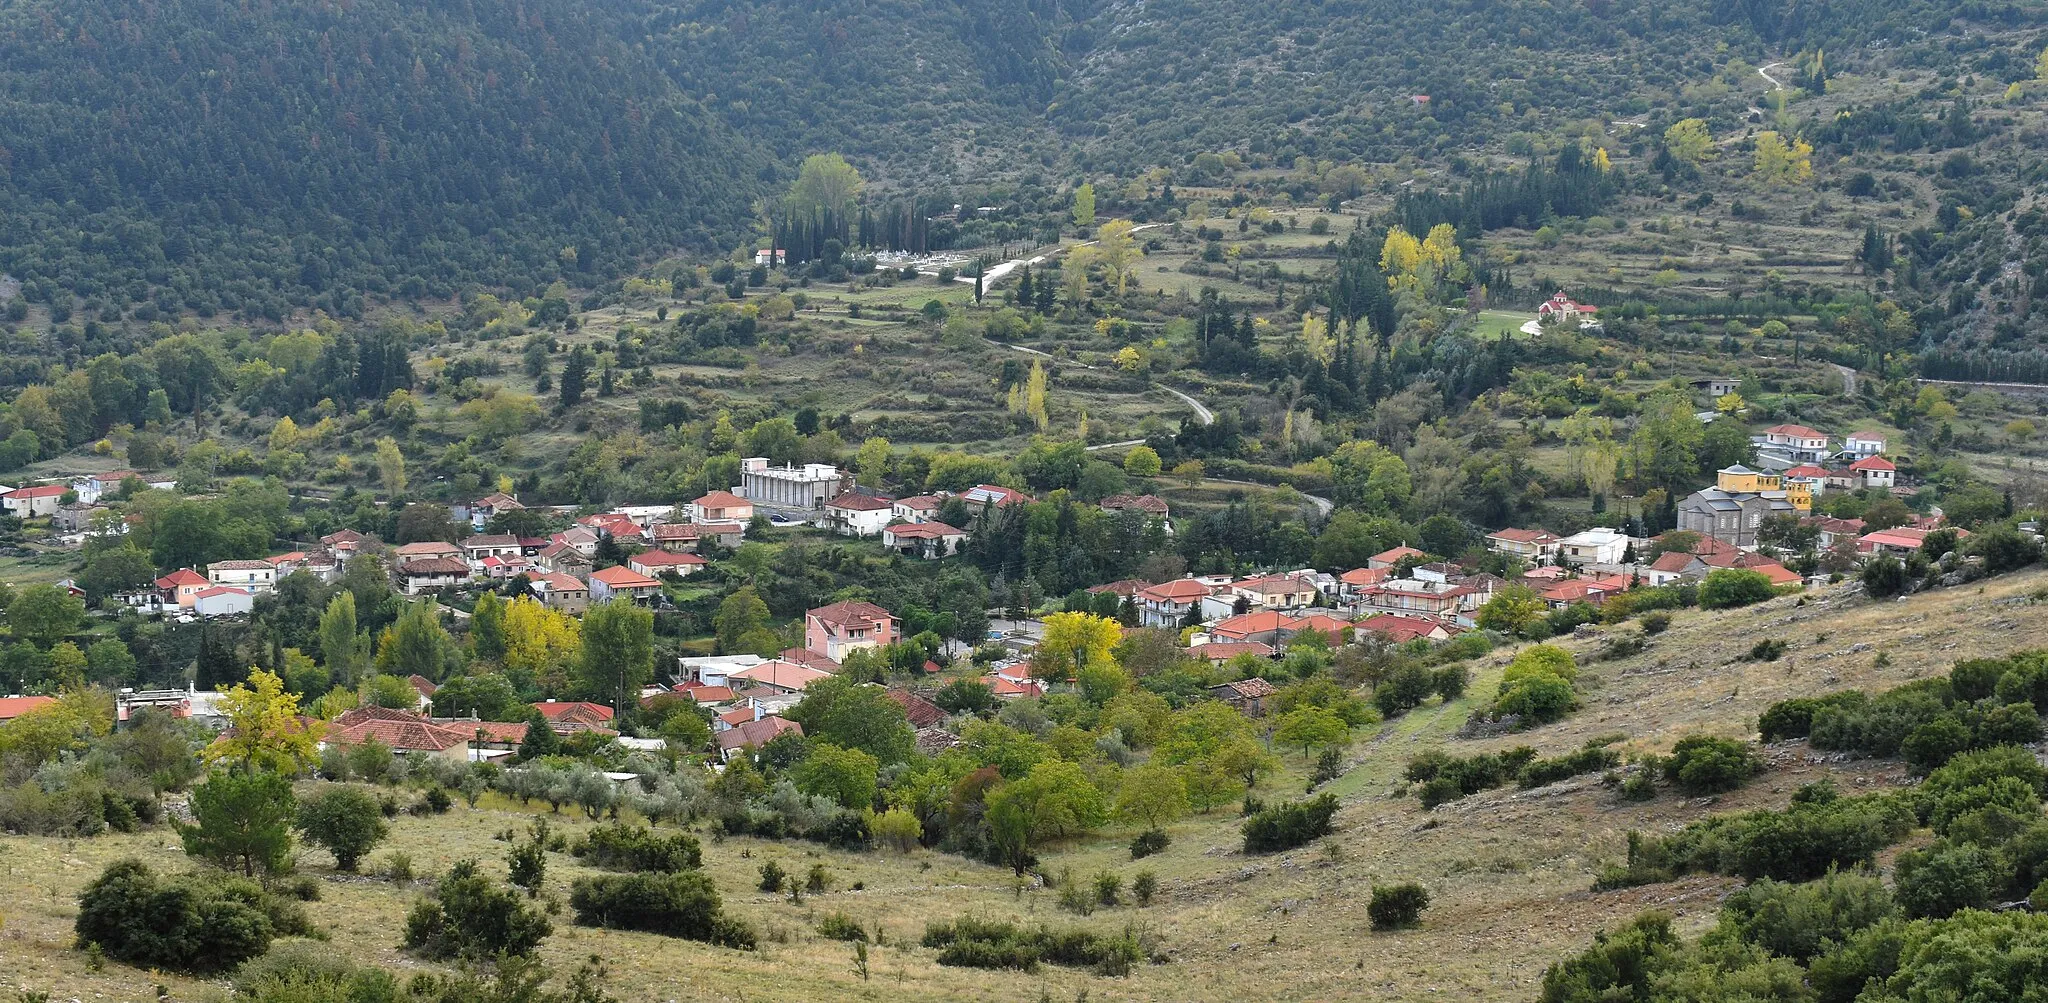 Photo showing: Overview of the village of Skotini, Argolis during fall.